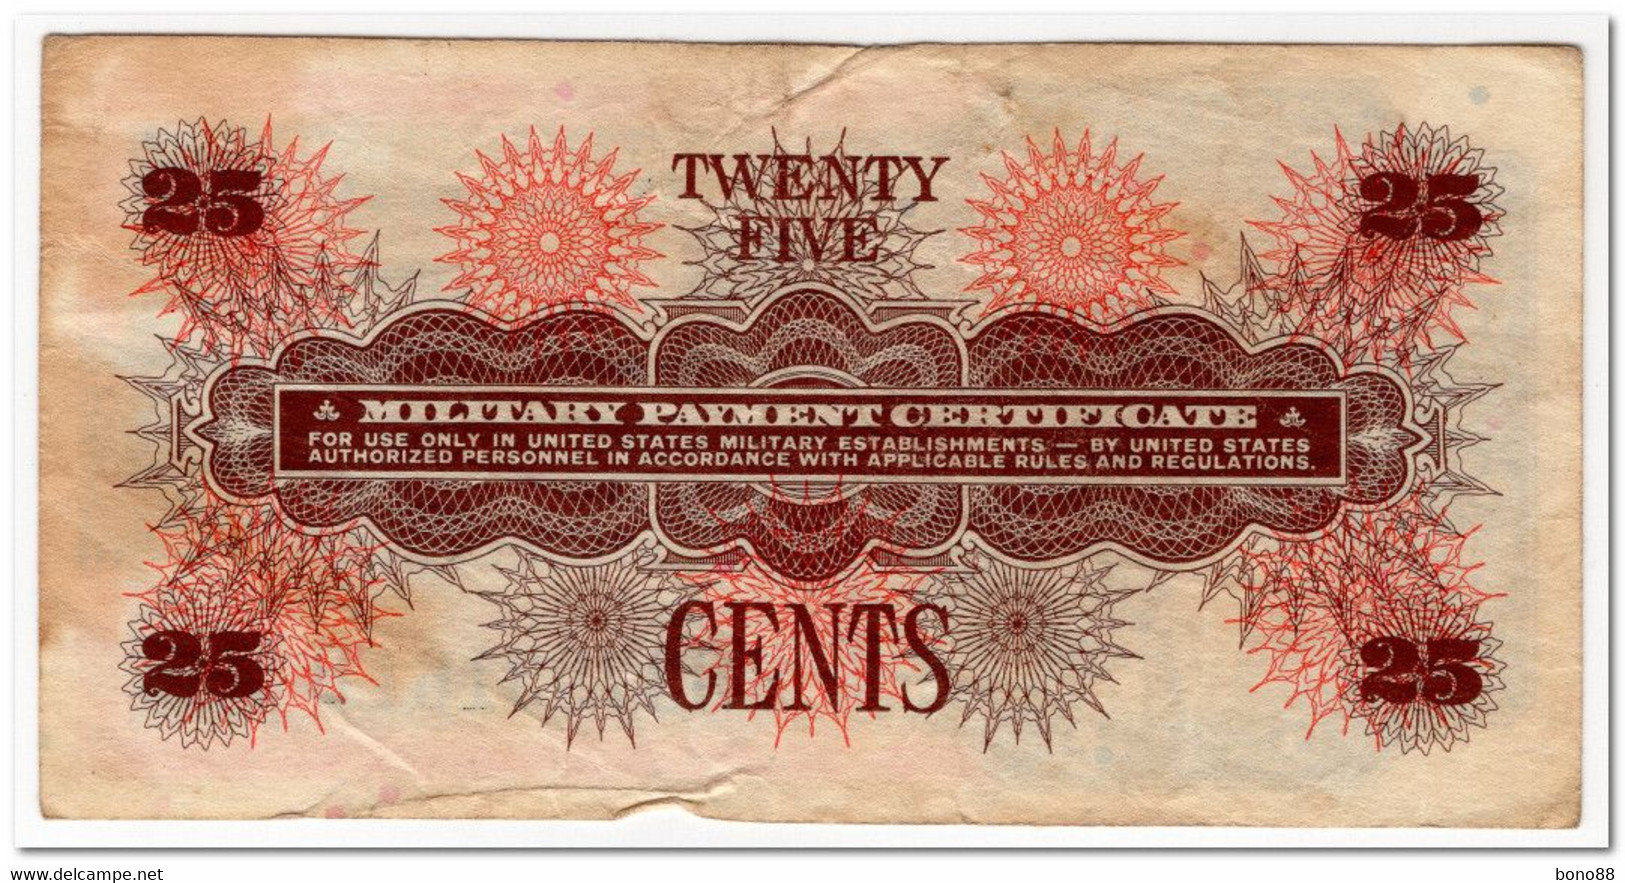 UNITED STATES,MILITARY PAYMENT CERTIFICATE,25 CENTS,1968,M66,MICRO TEAR,F-VF - 1968-1969 - Series 661